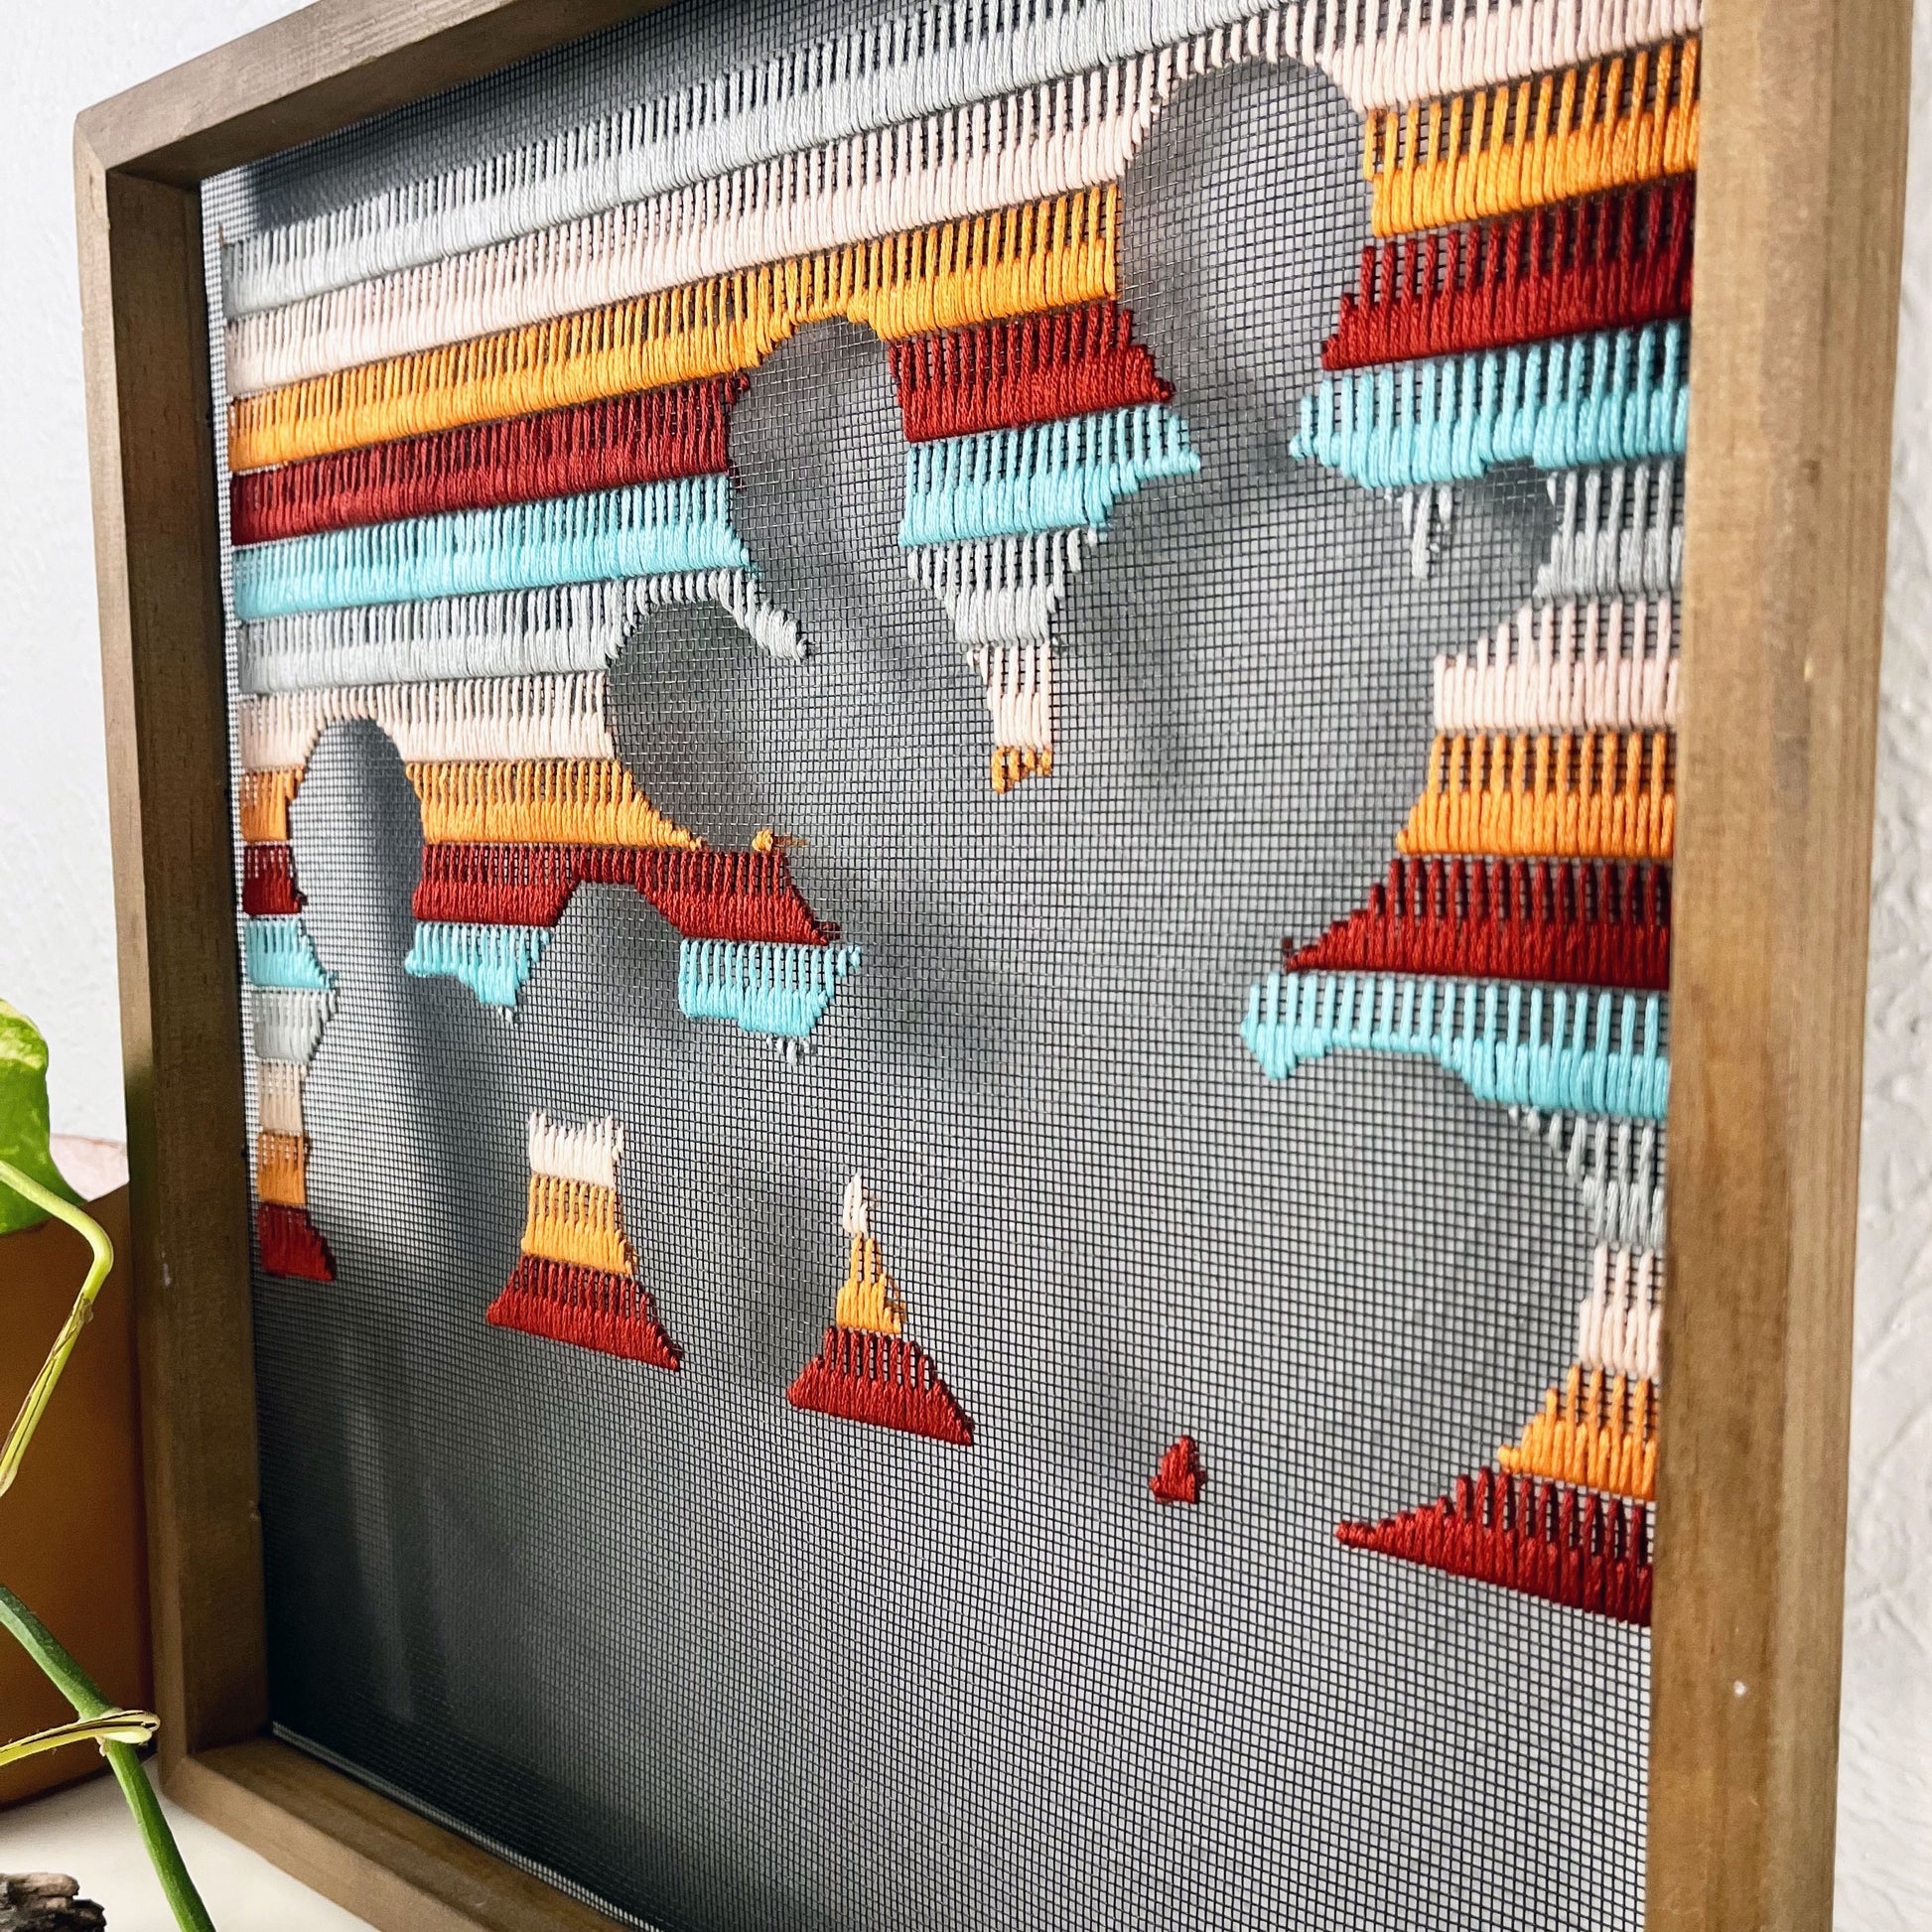 close up angled view of a piece of window screen hand stitched with rows of maroon orange peach grey and aqua blue stitches with an image in negative space of a prickly pear cactus, in a square wood frame, on a white counter, with a pothos vine around it